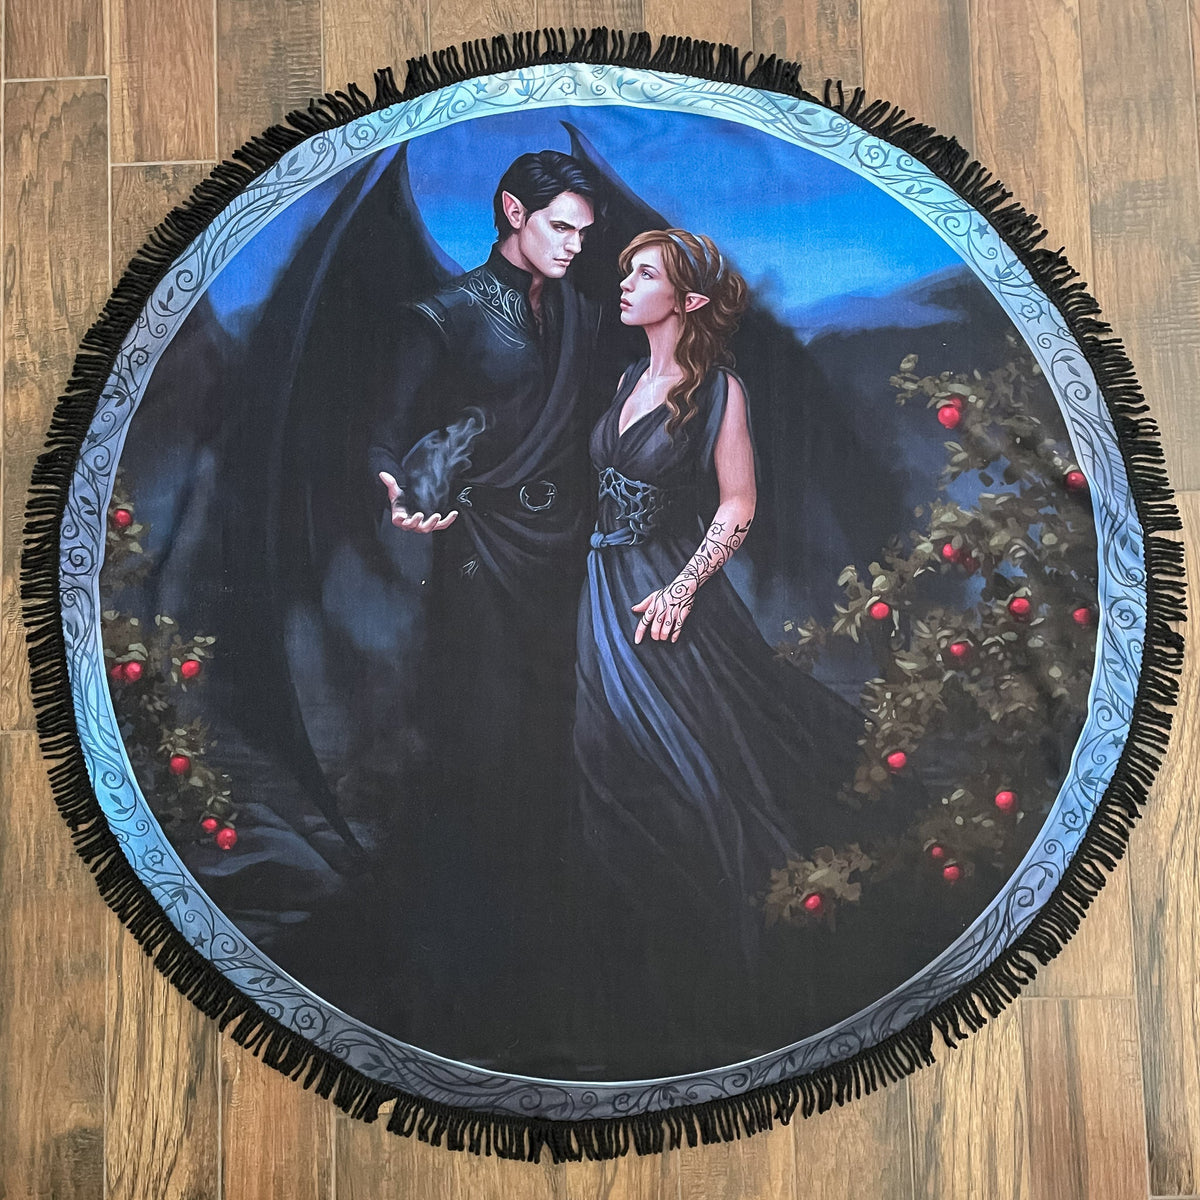 Round towel with fringe edge. Rhysand &amp; Feyre in black. Rhysand has magic misting from his hand. Bushes of red fruit frame them.